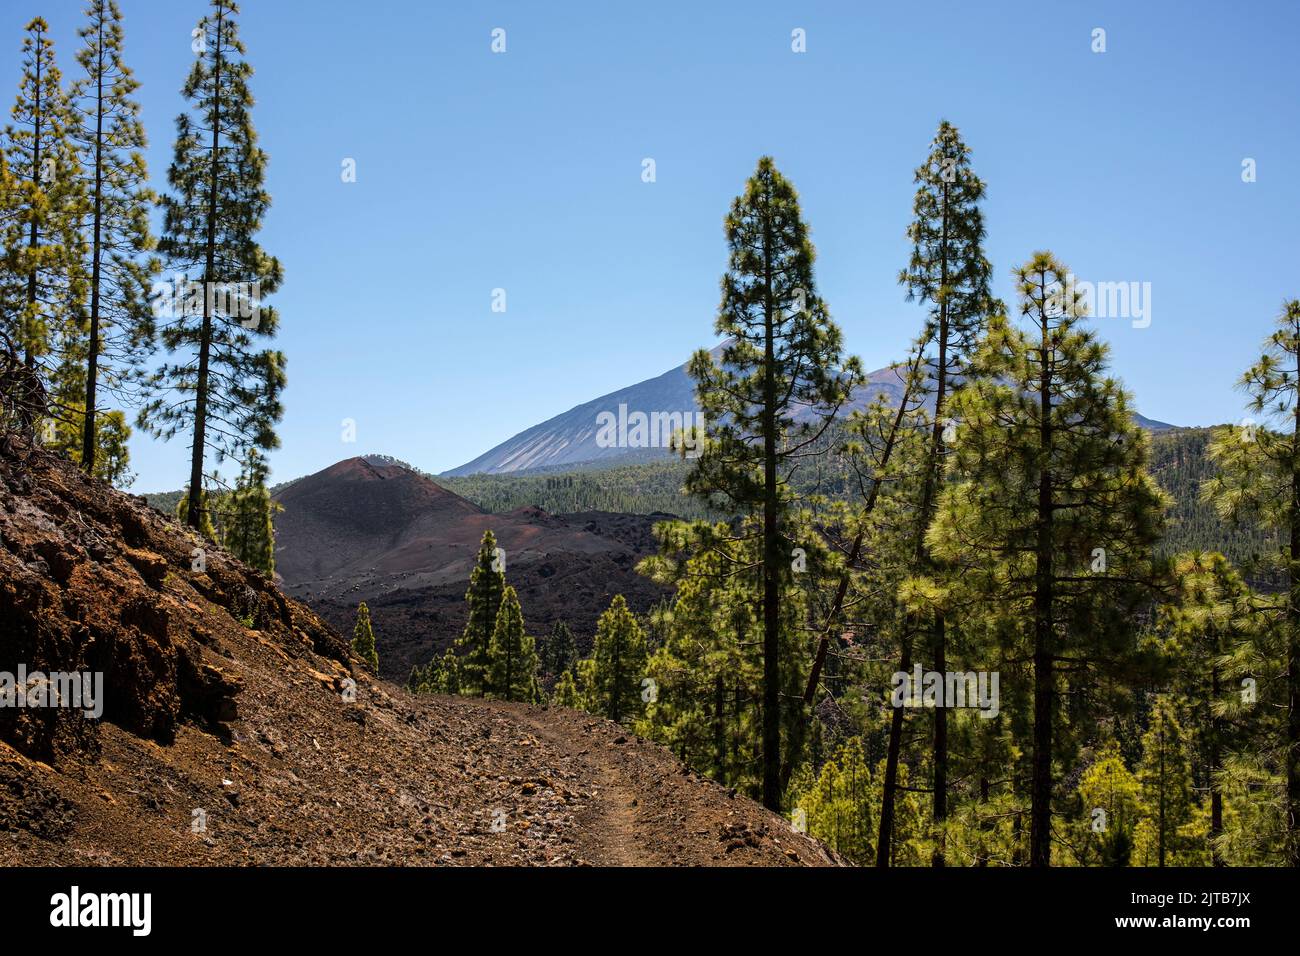 Canarian pine trees, pinus canariensis, in the pine forest near to Chinyero, Tenerife, Canary Islands, Spain Stock Photo